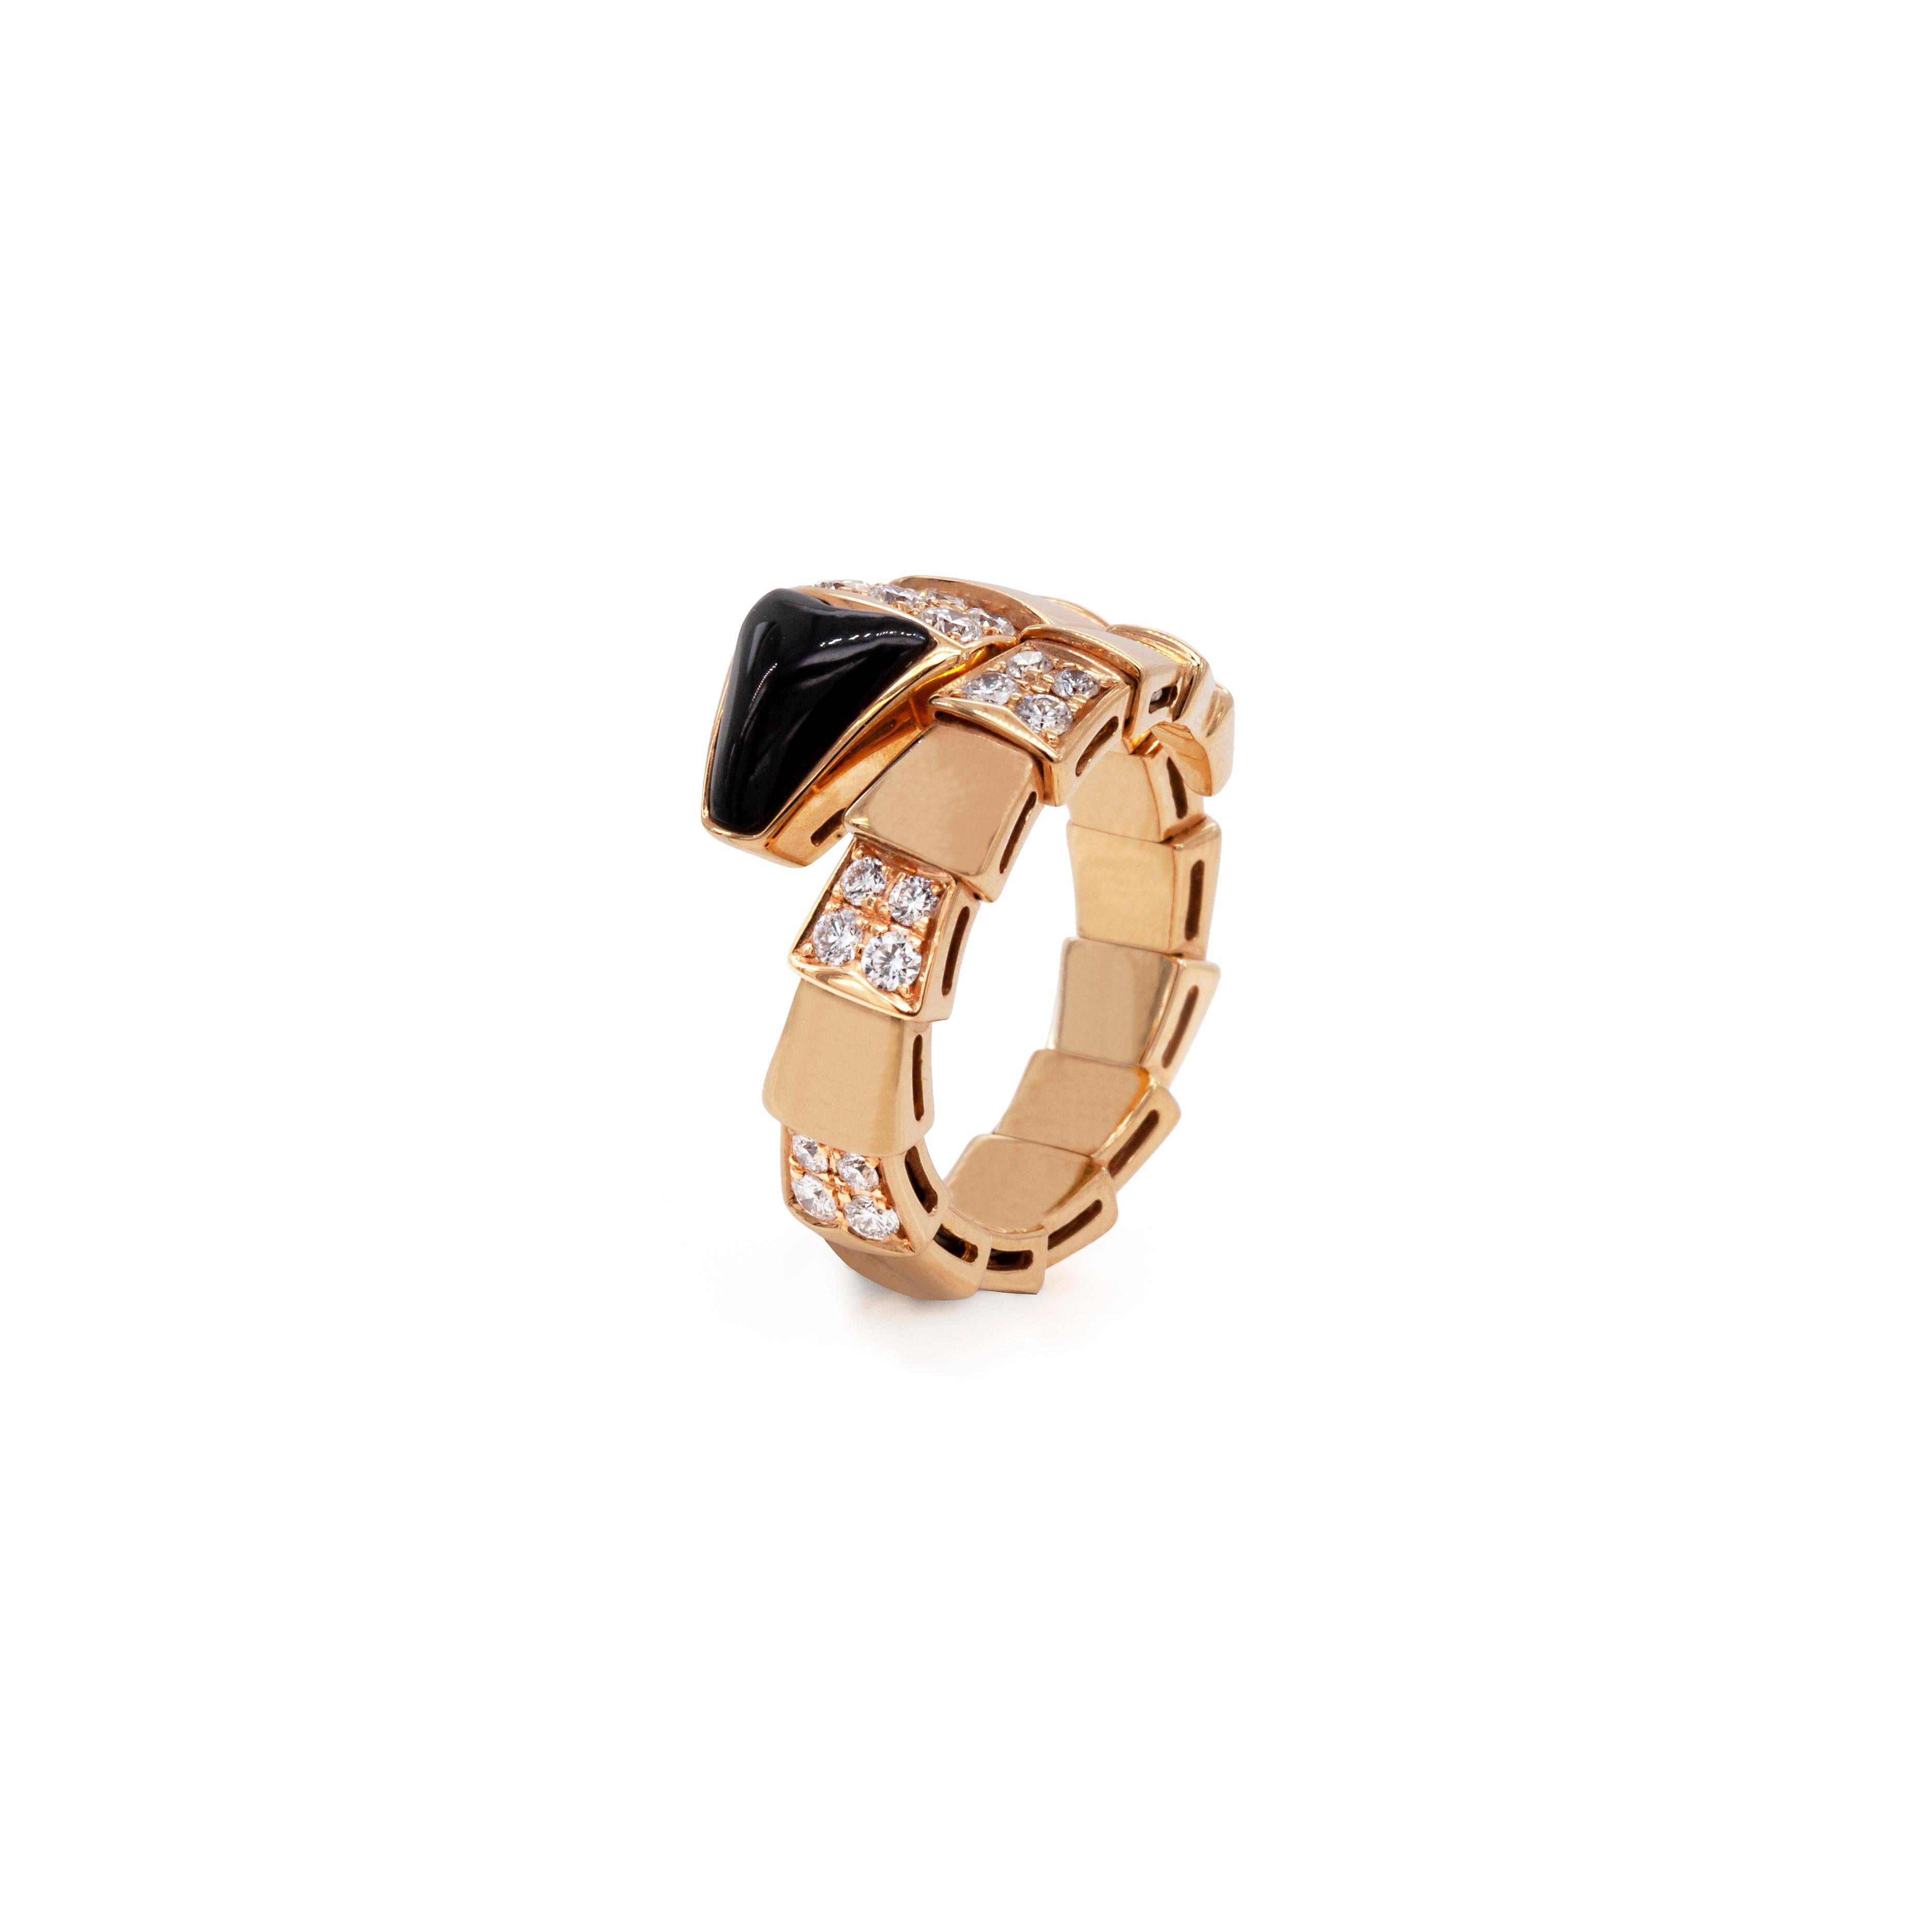 Night or day, there is no occasion that this striking diamond-set Viper ring from Bulgari's iconic Serpenti Collection isn't perfect for.

This signature Viper ring is designed to beautifully coil around the finger in true serpent style. It's